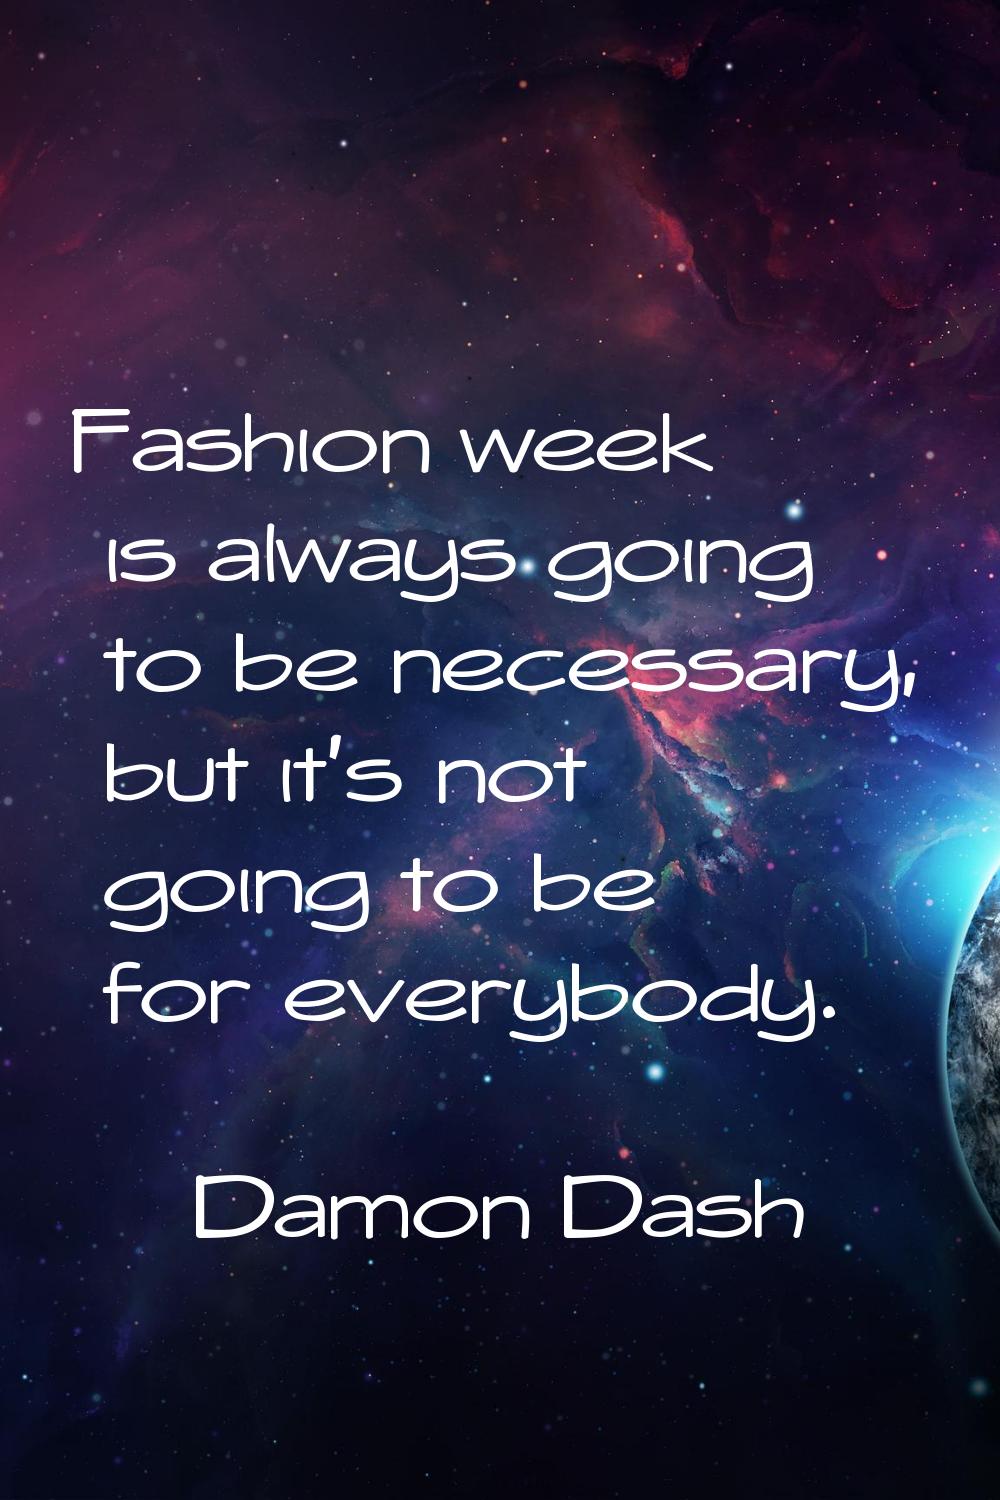 Fashion week is always going to be necessary, but it's not going to be for everybody.